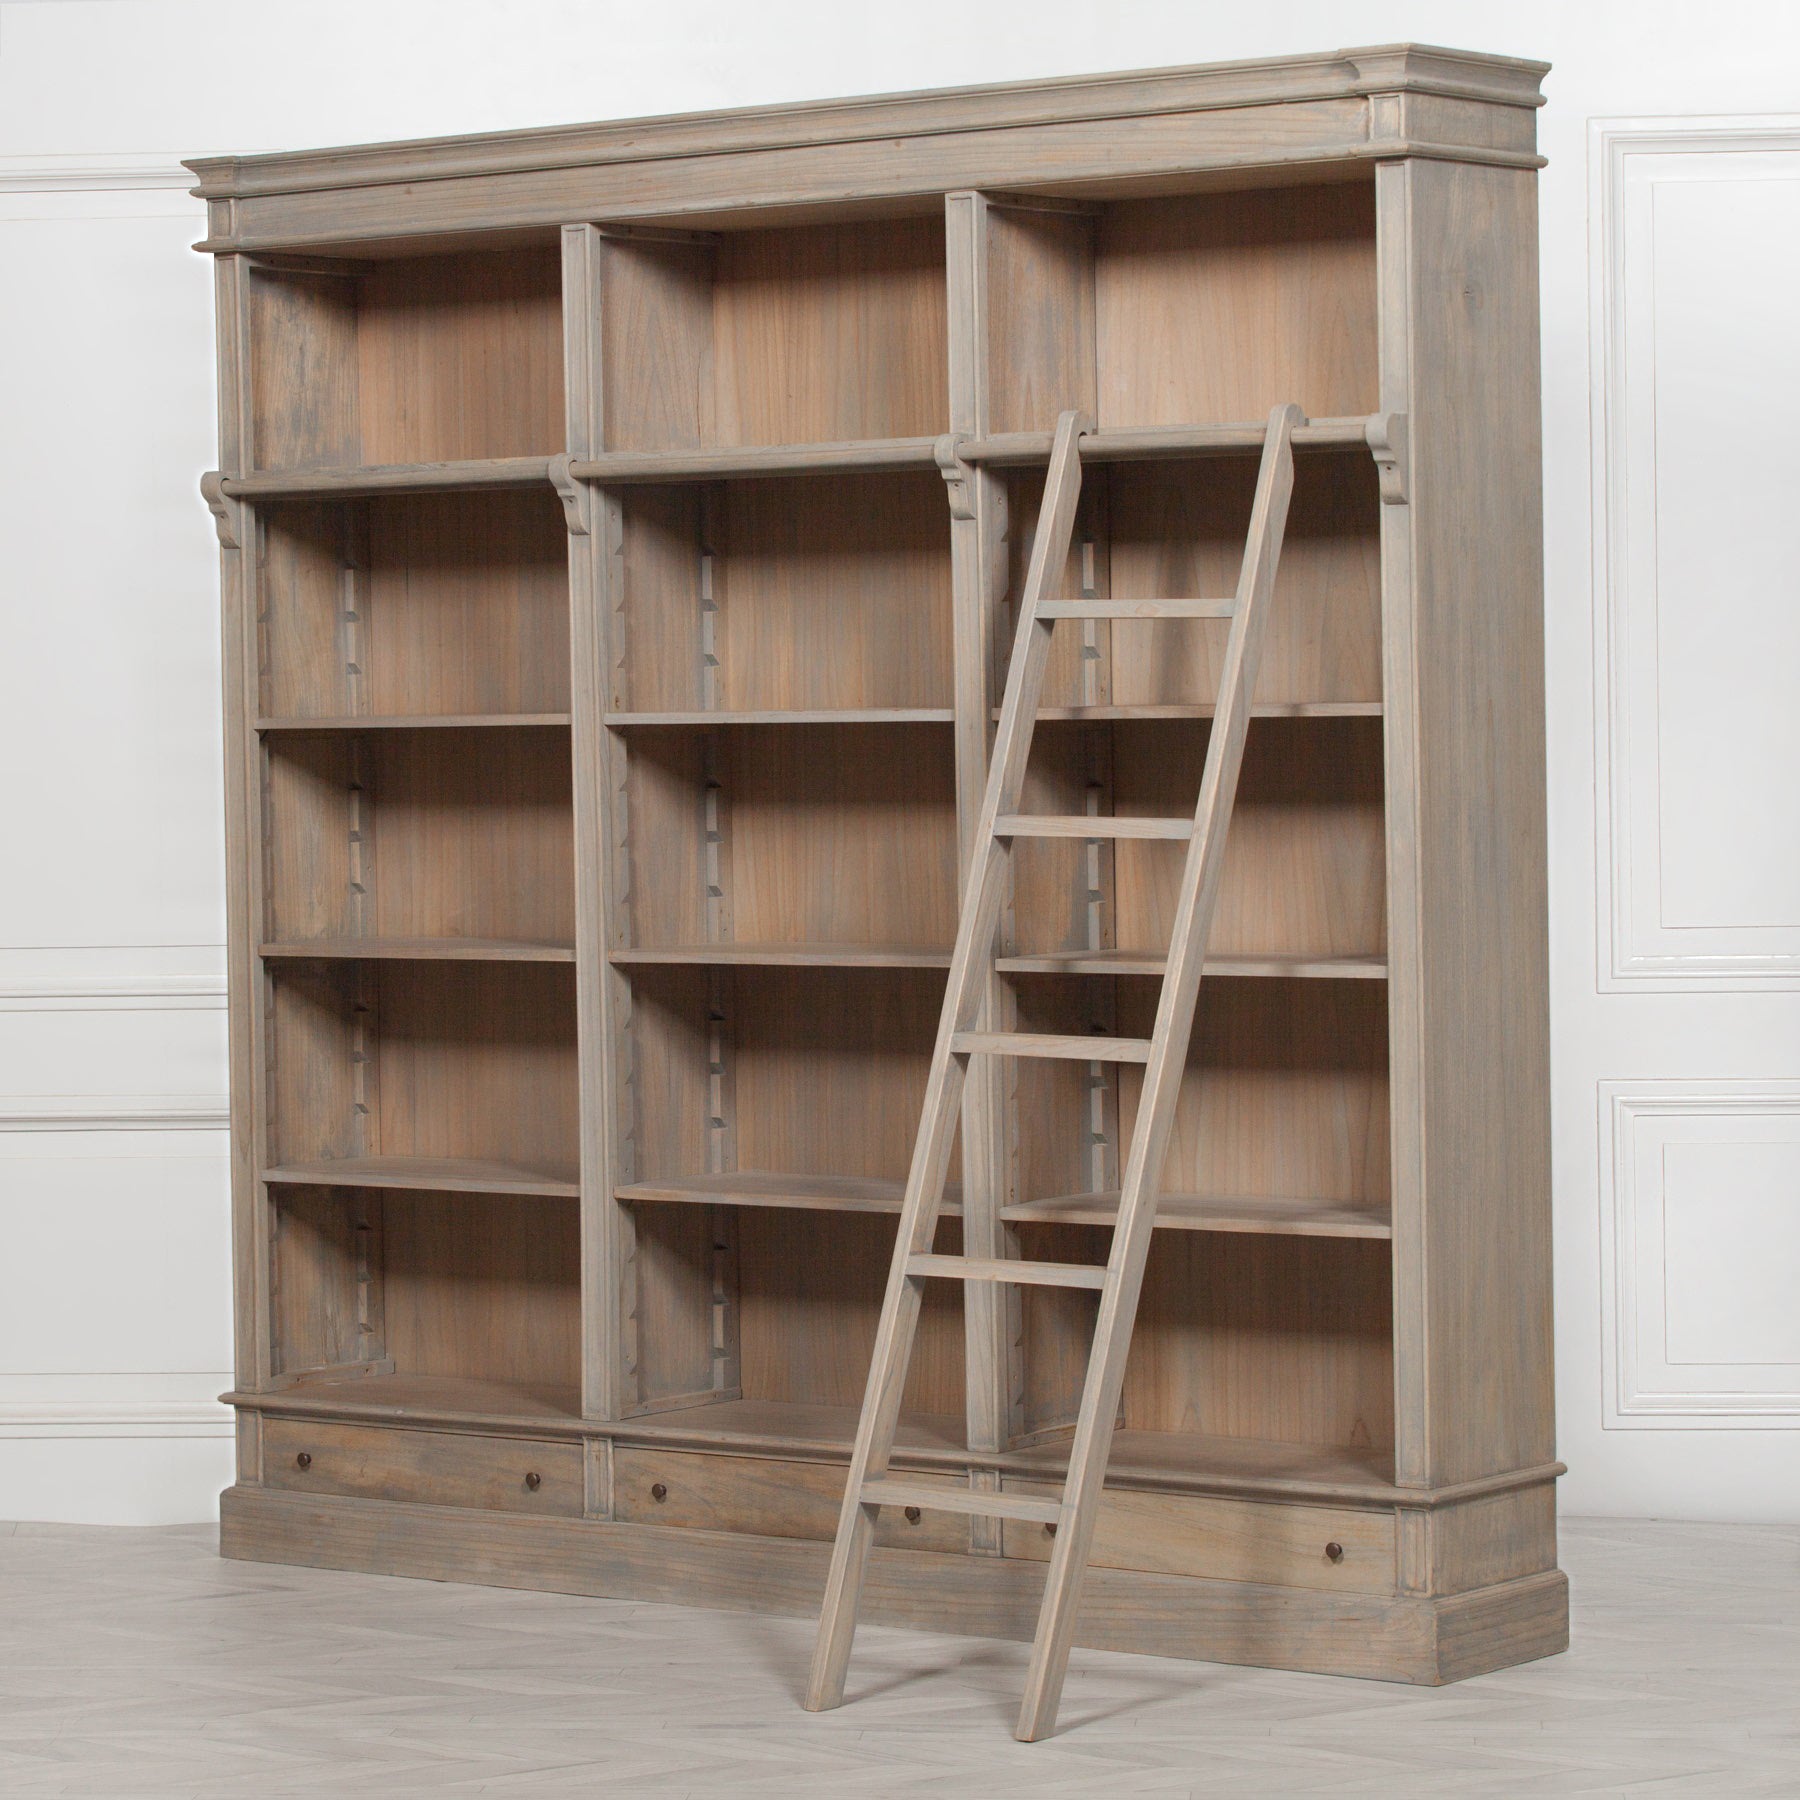 Large Rustic Wooden Bookcase with Ladder